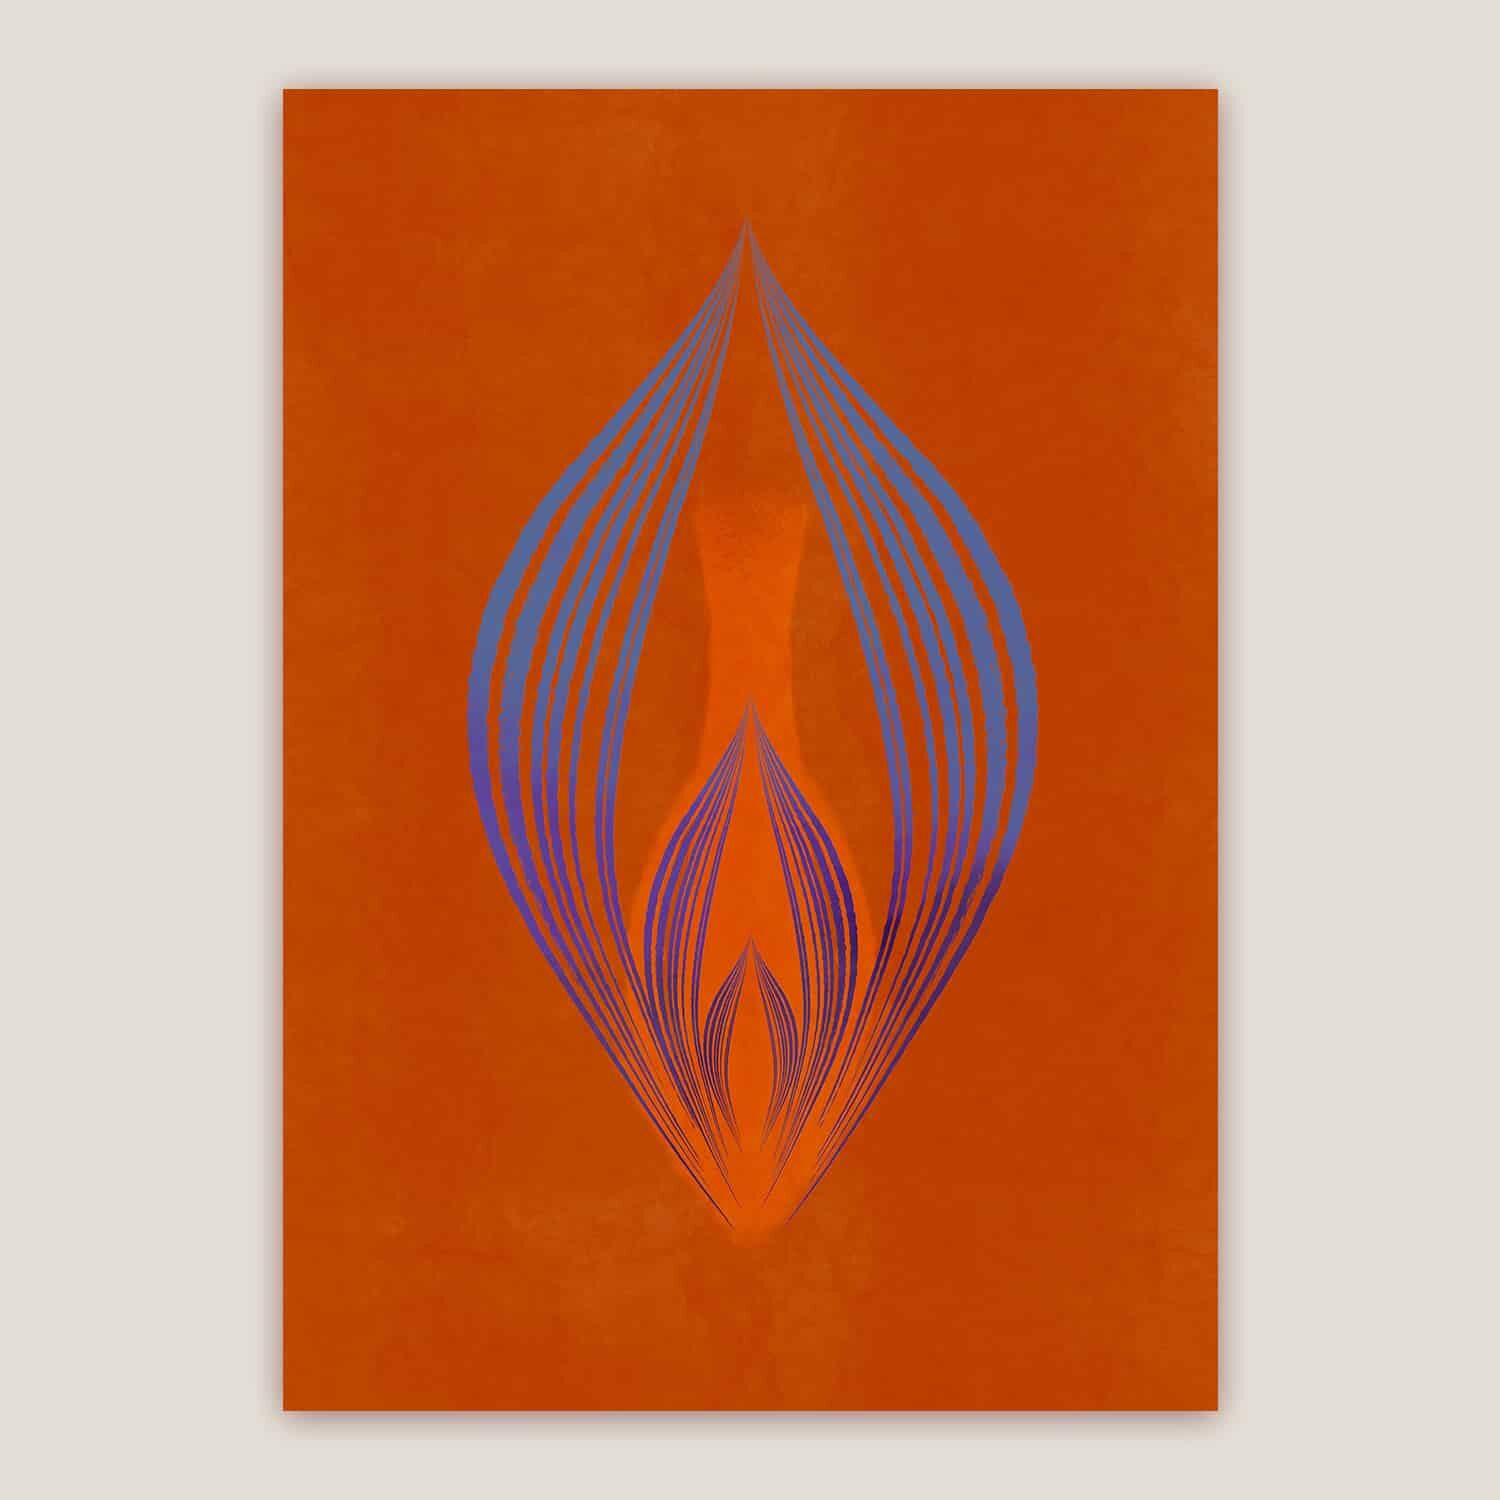 Abstract Visionary Art Print Expansion by digital artist and printmaker Inta Leora